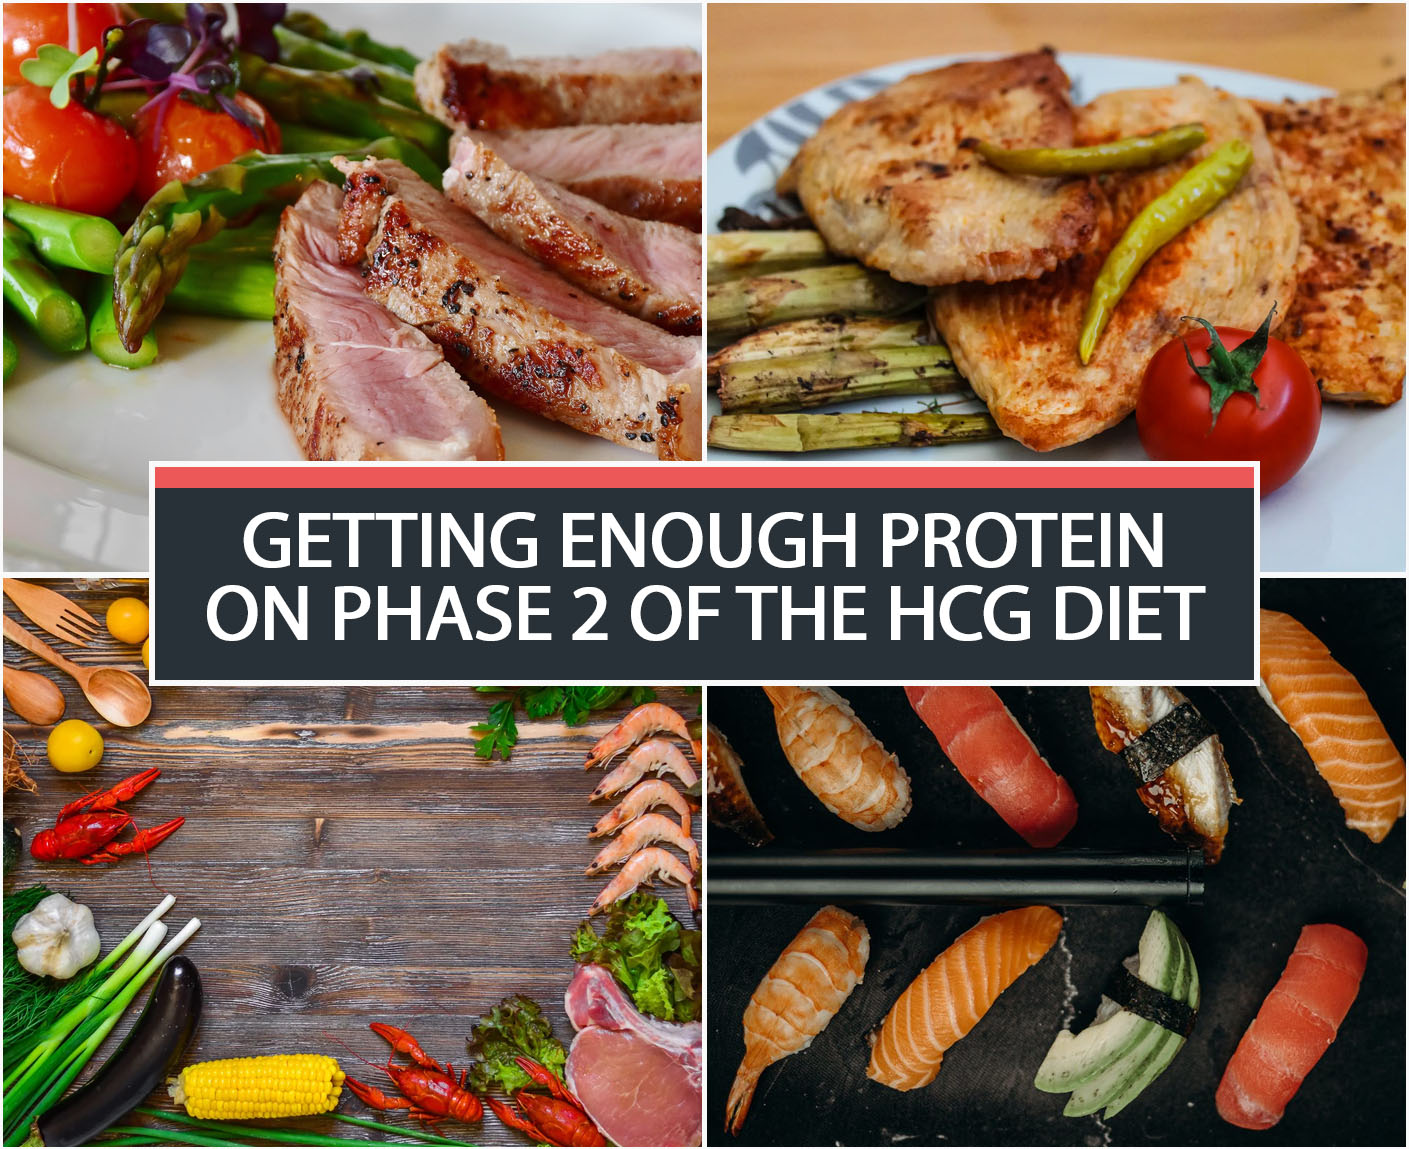 GETTING ENOUGH PROTEIN ON PHASE 2 OF THE HCG DIET ...